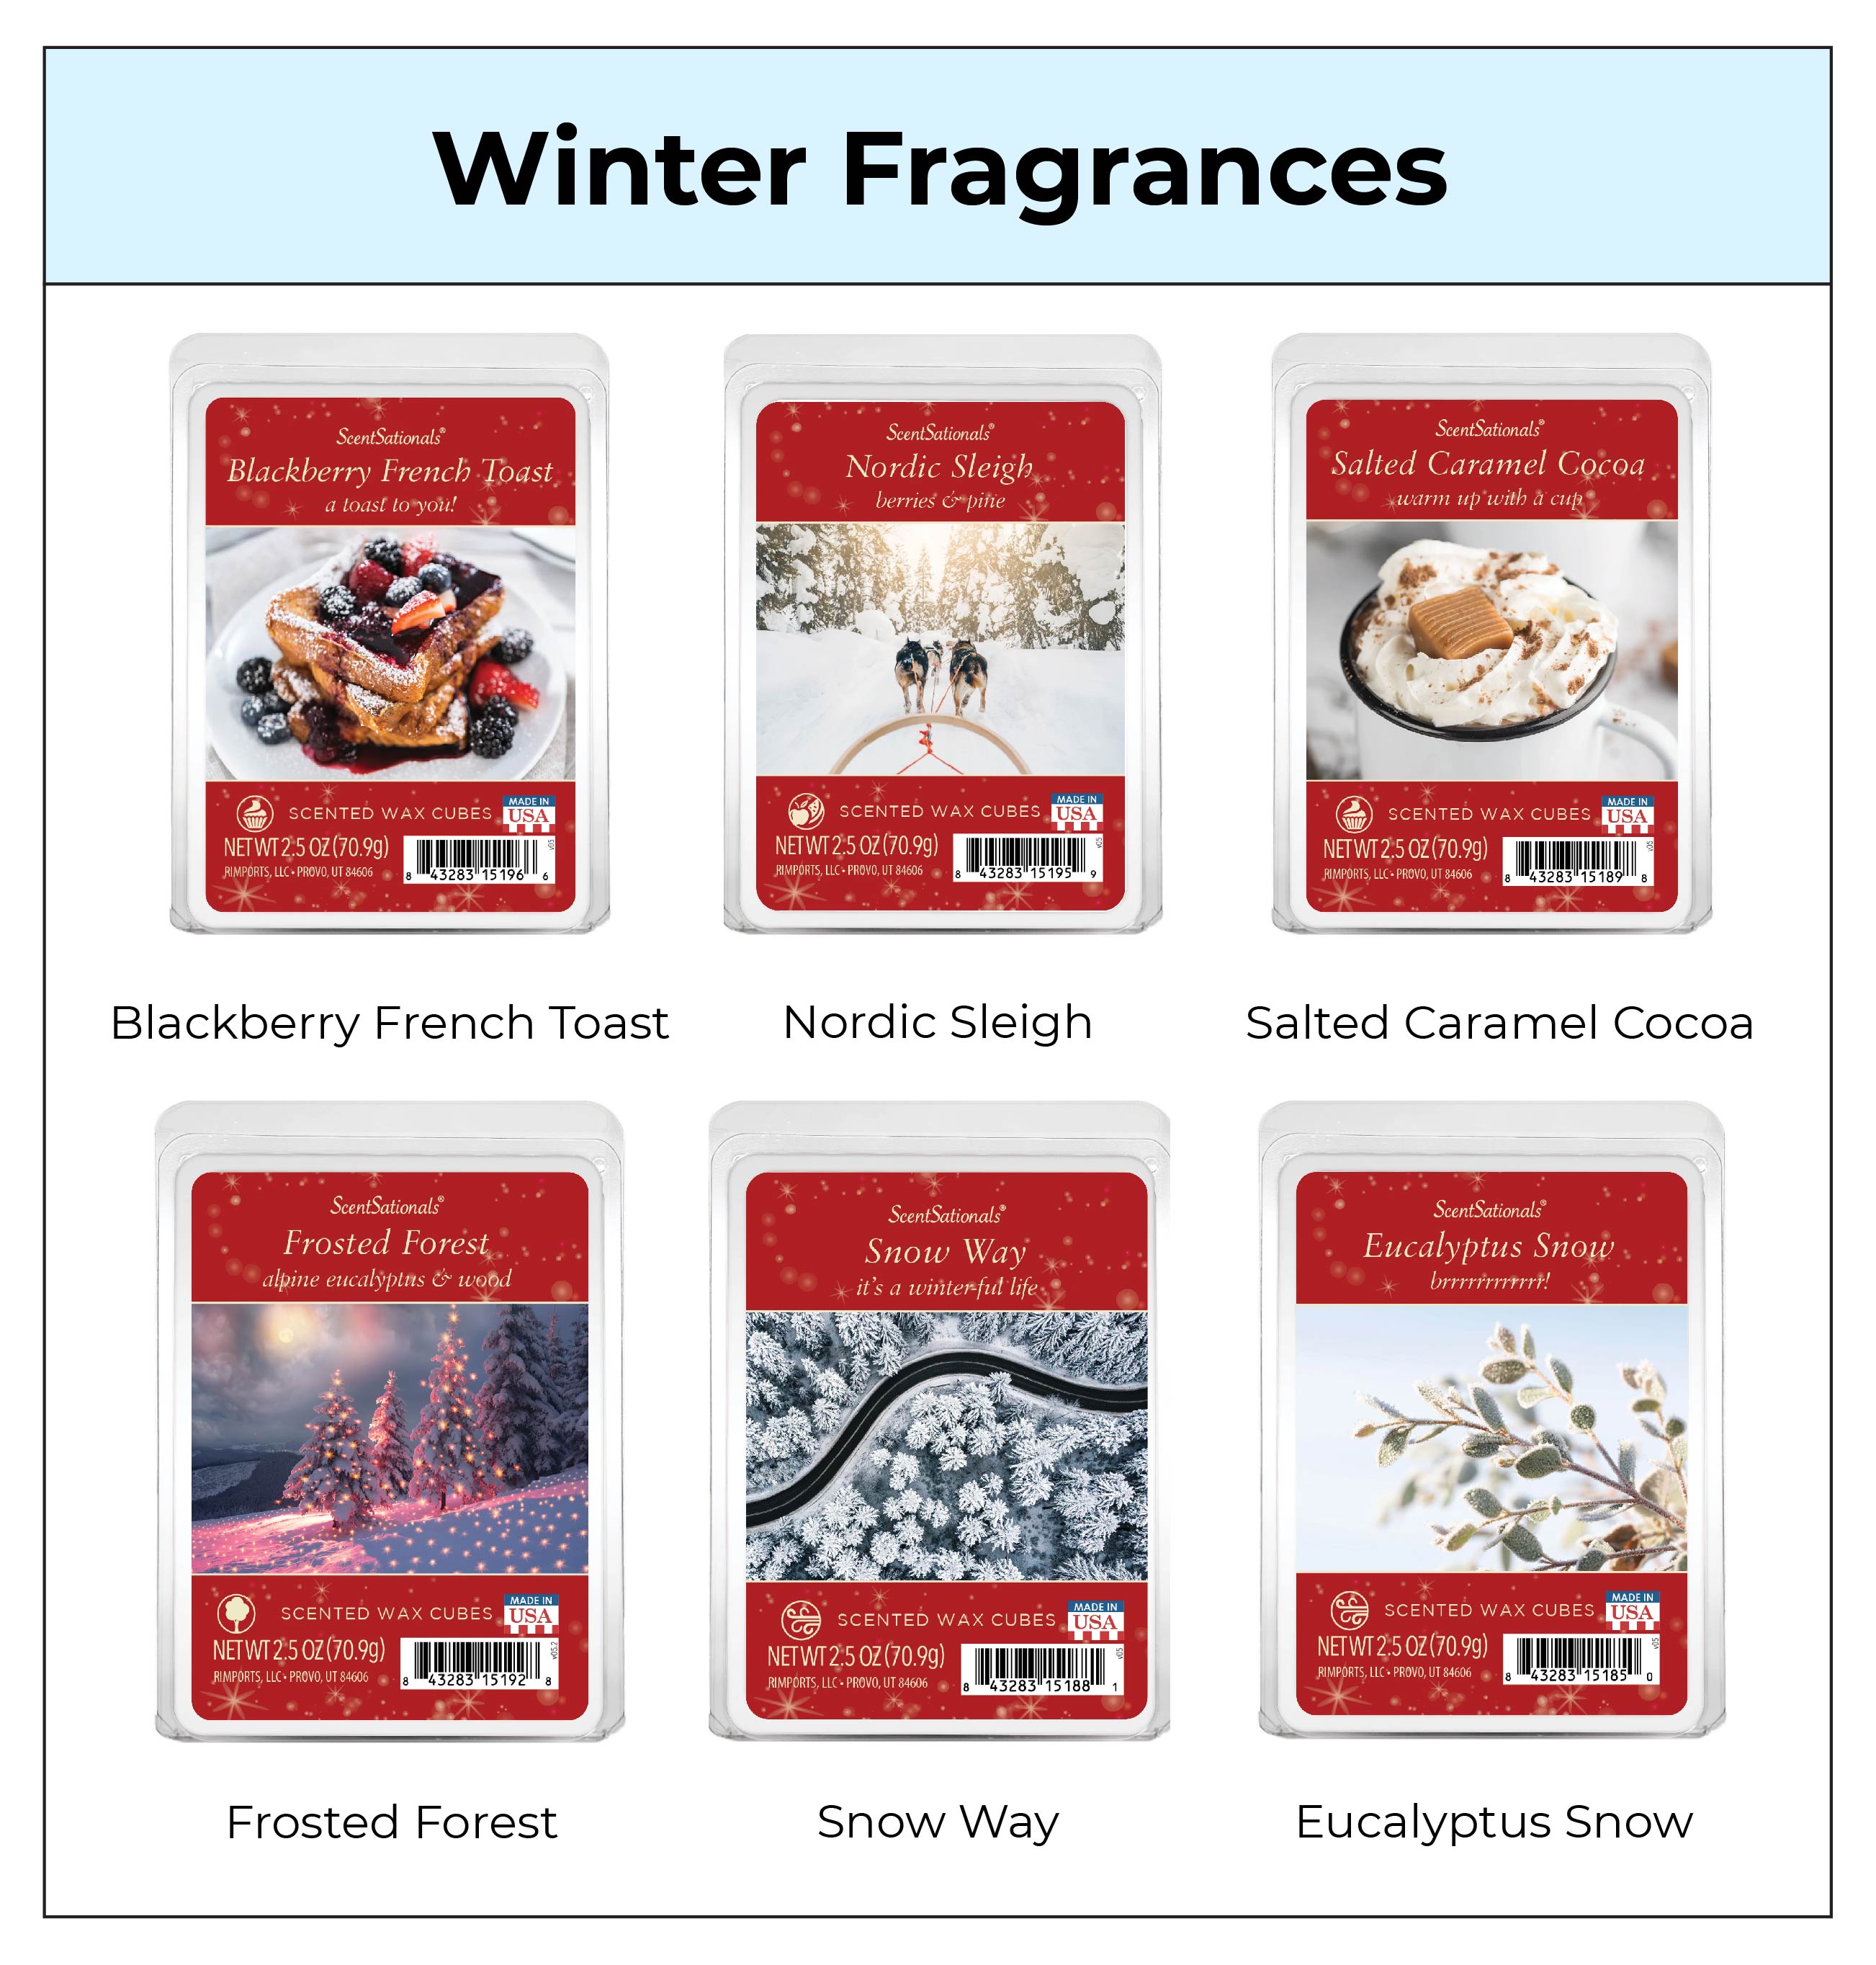 ScentSationals winter fragrance options for wax melts